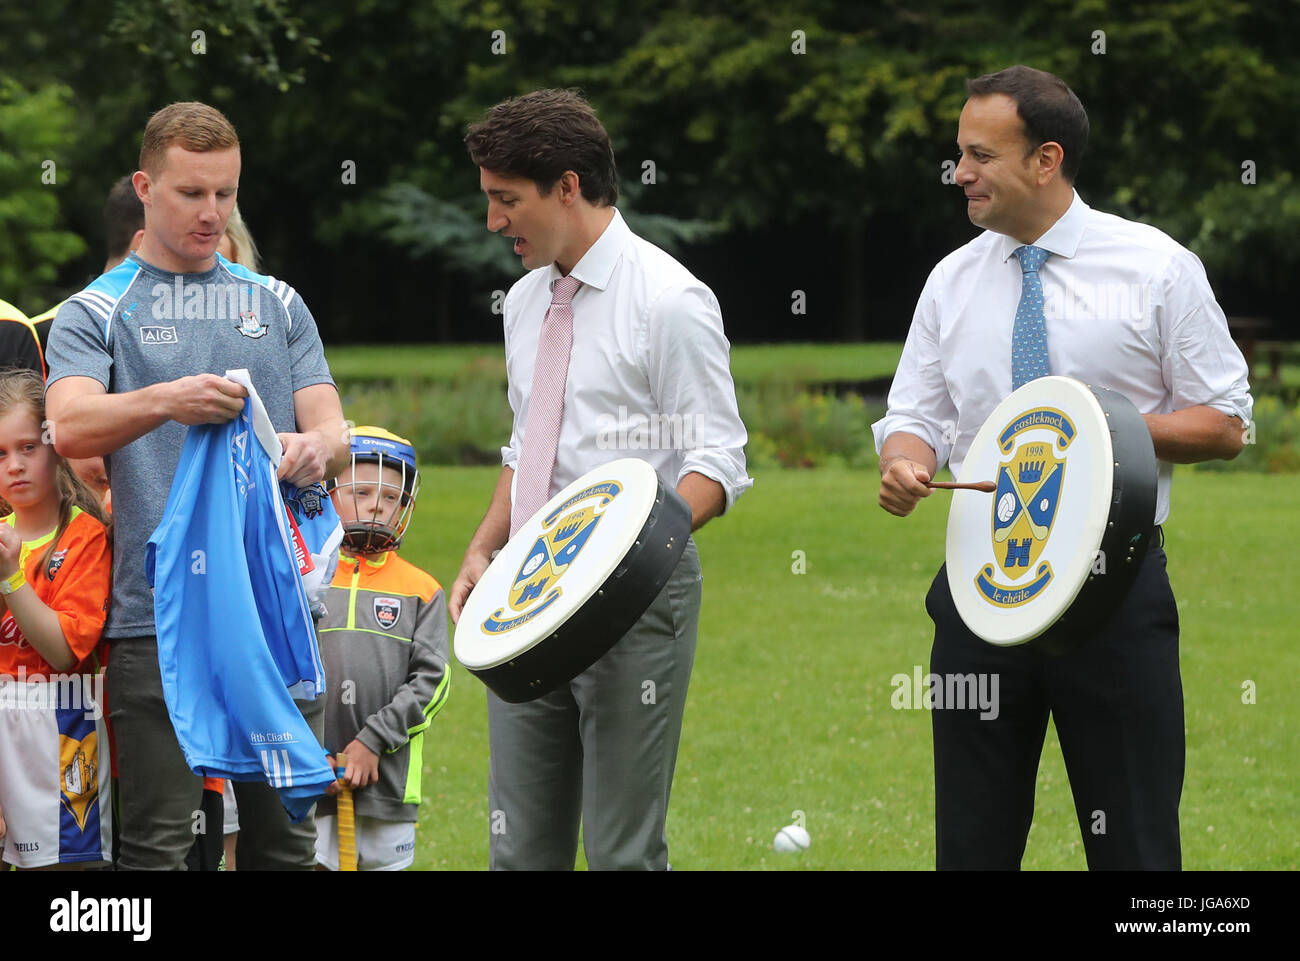 Canadian Prime Minister Justin Trudeau (centre) is presented with an Irish football shirt by Dublin GAA footballer Ciaran Kilkenny, after receiving a Bodhran (Irish drum) with Irish Taoiseach Leo Varadkar, after they held a press conference at Farmleigh House in Dublin. Stock Photo